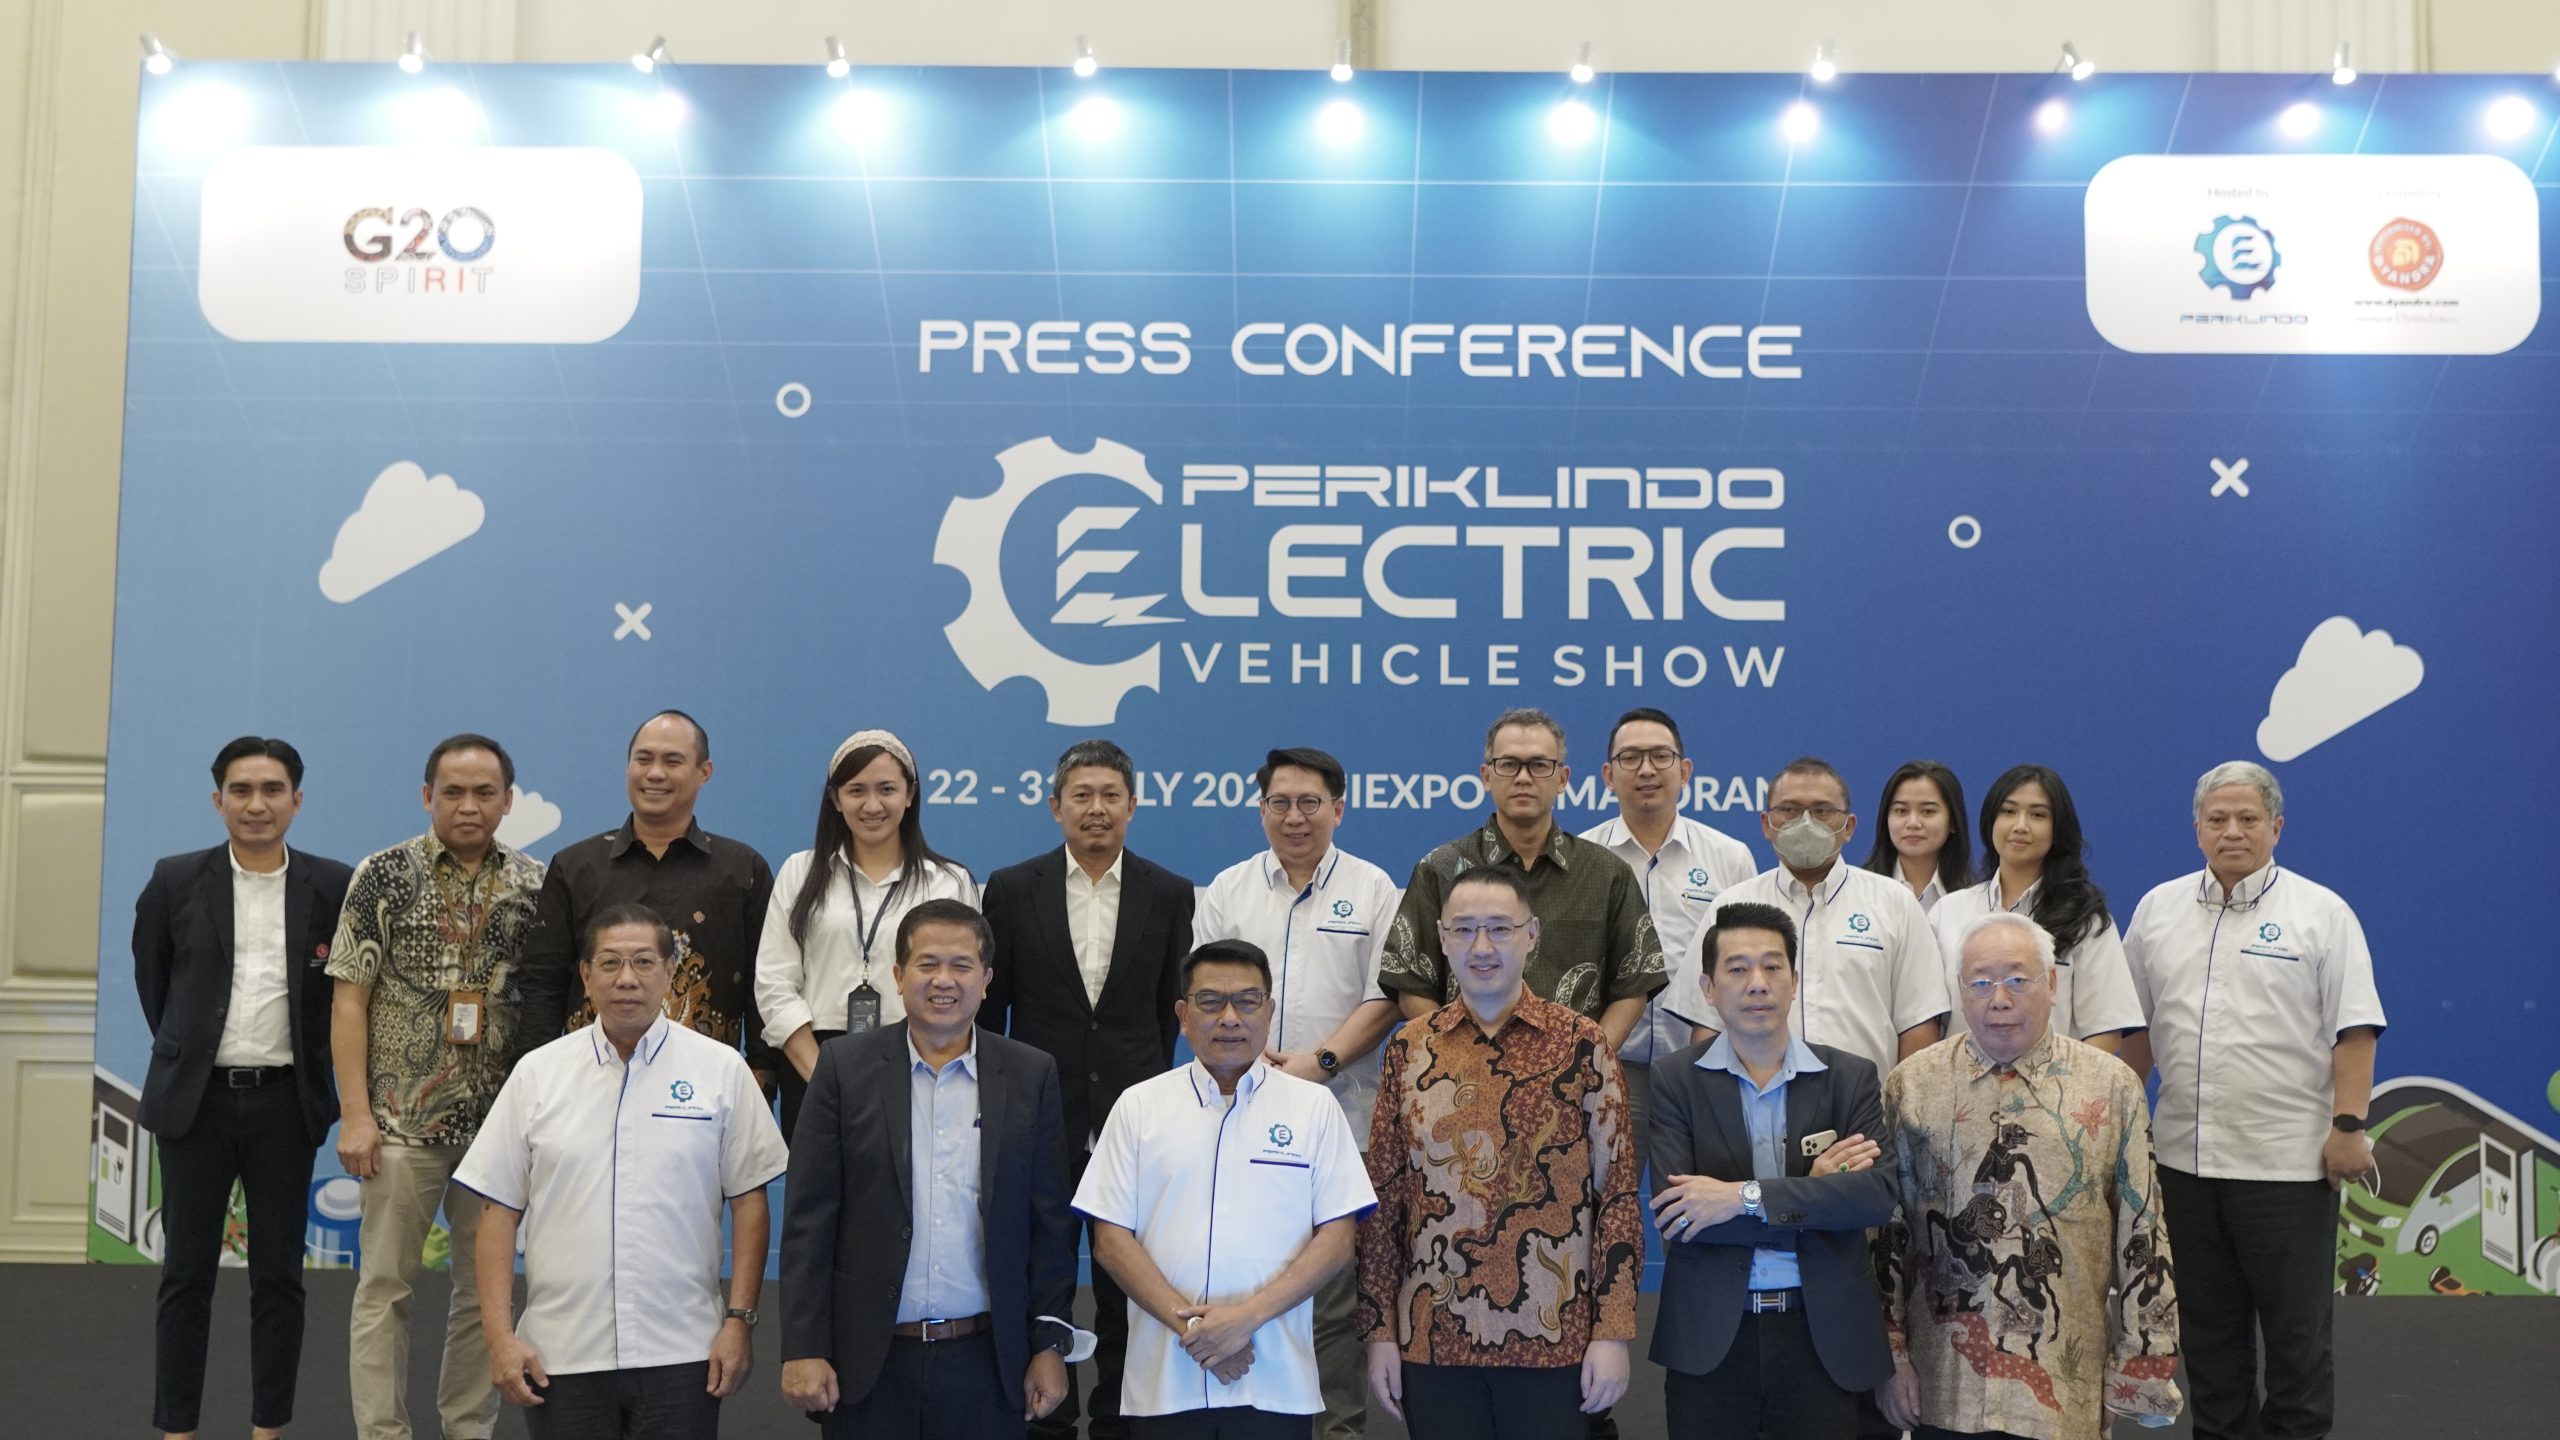 Press Conference PERIKLINDO Electric Vehicle Show (PEVS) 2022